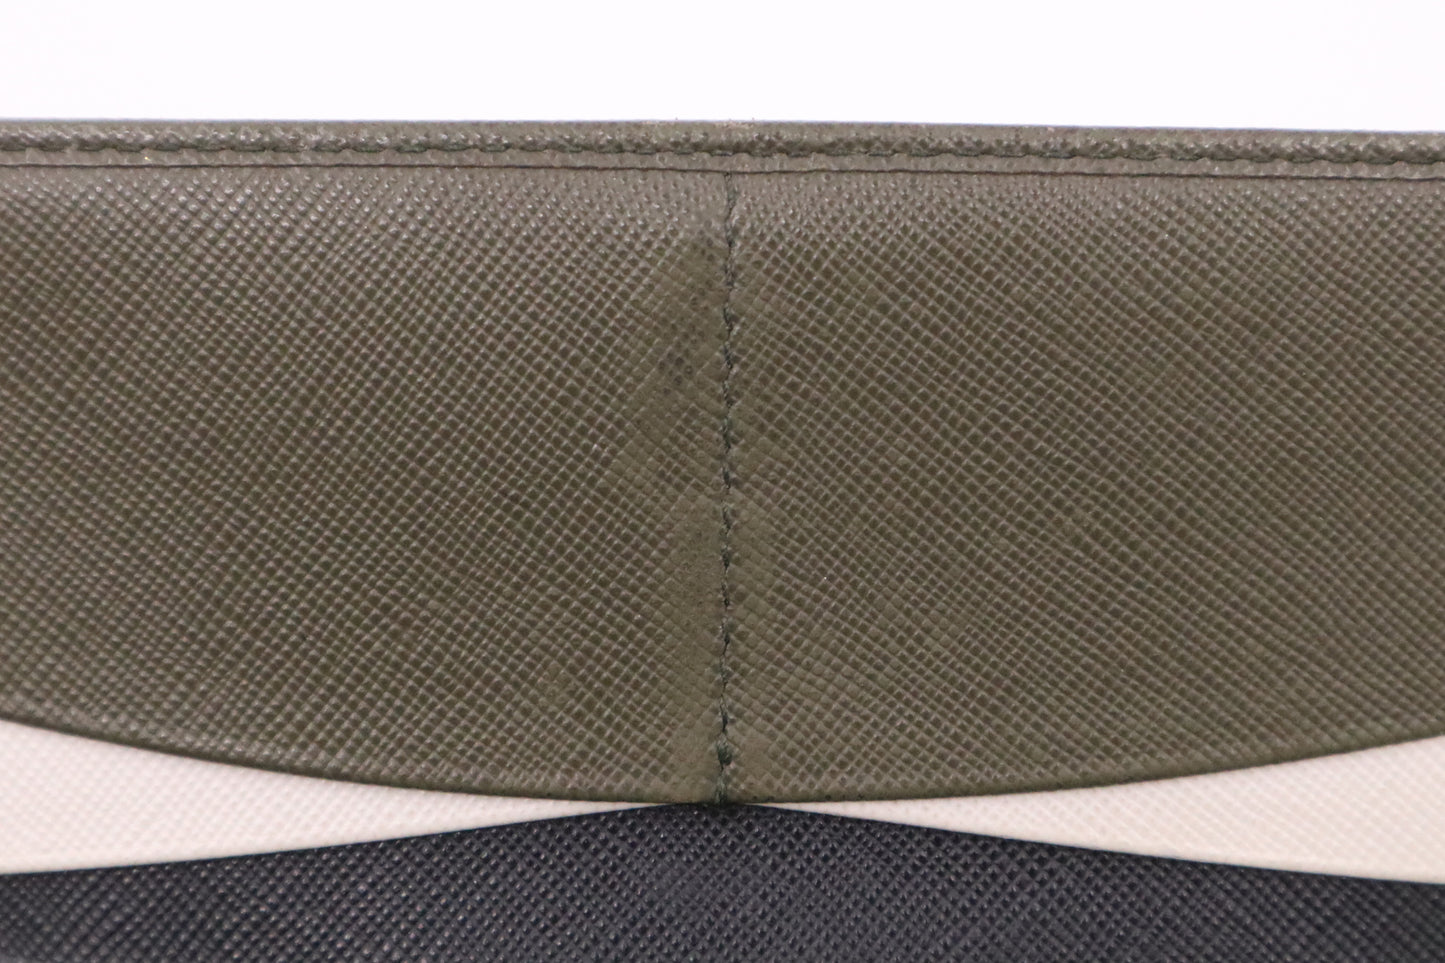 Prada Long Wallet in Military Green Saffiano Leather